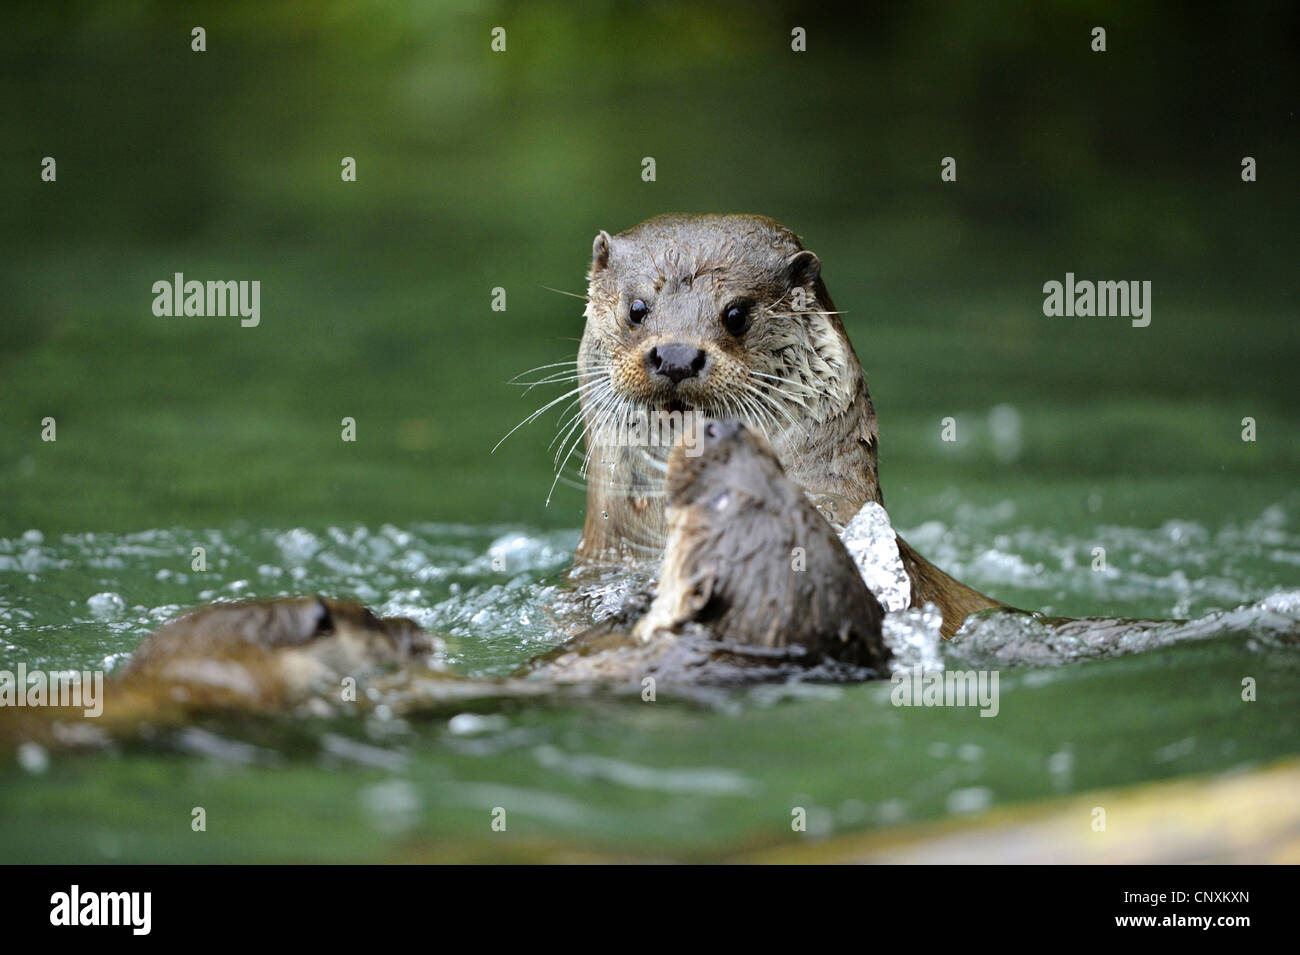 European river otter, European Otter, Eurasian Otter (Lutra lutra), three animals fighting in shallow water, Germany Stock Photo